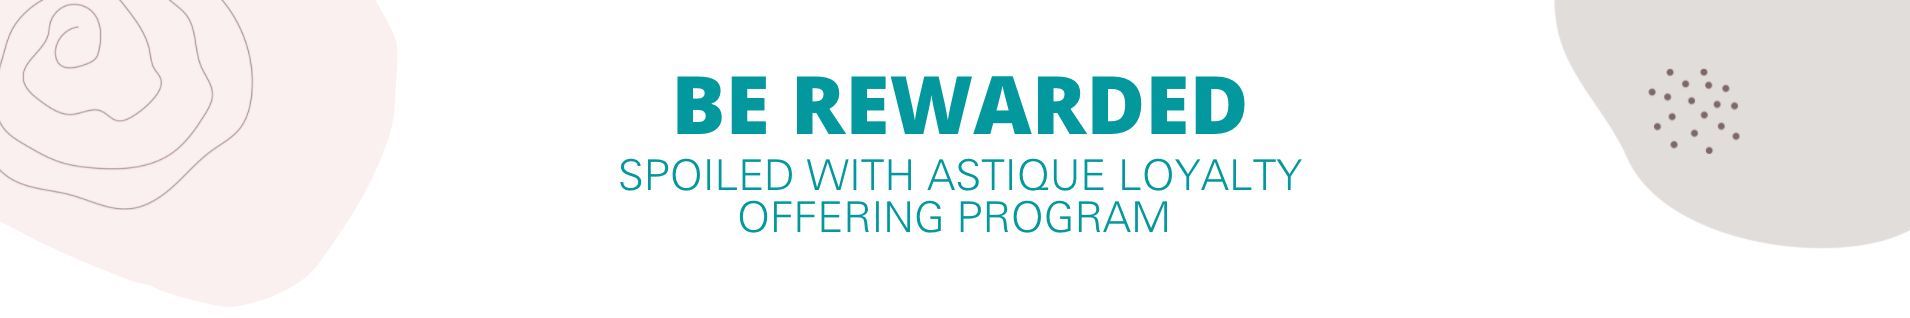 Be Rewarded and Spoiled with Astique Loyalty offering program